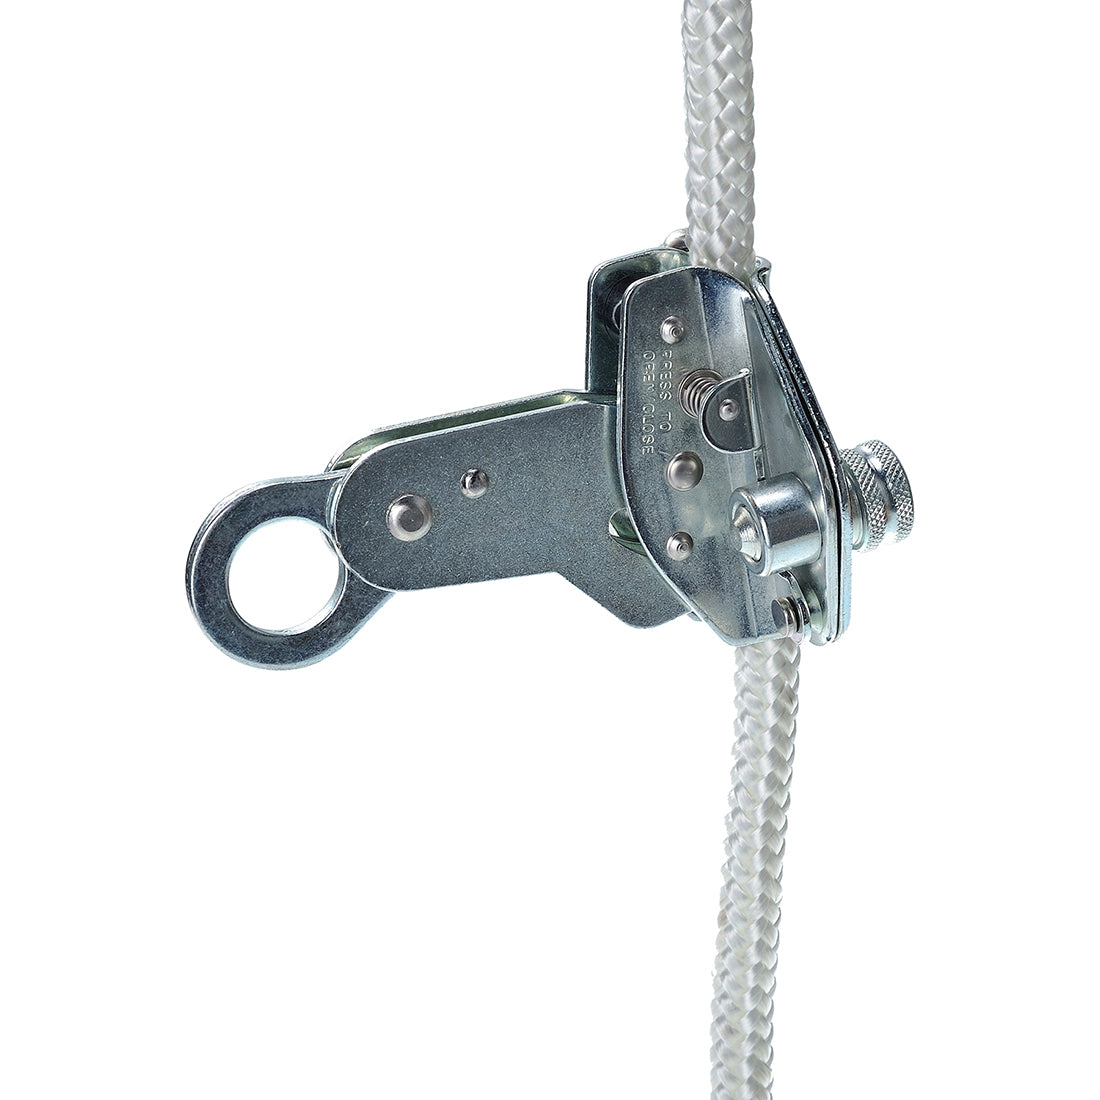 JSP 10m Rope Guided Fall Arrester, FAR0810